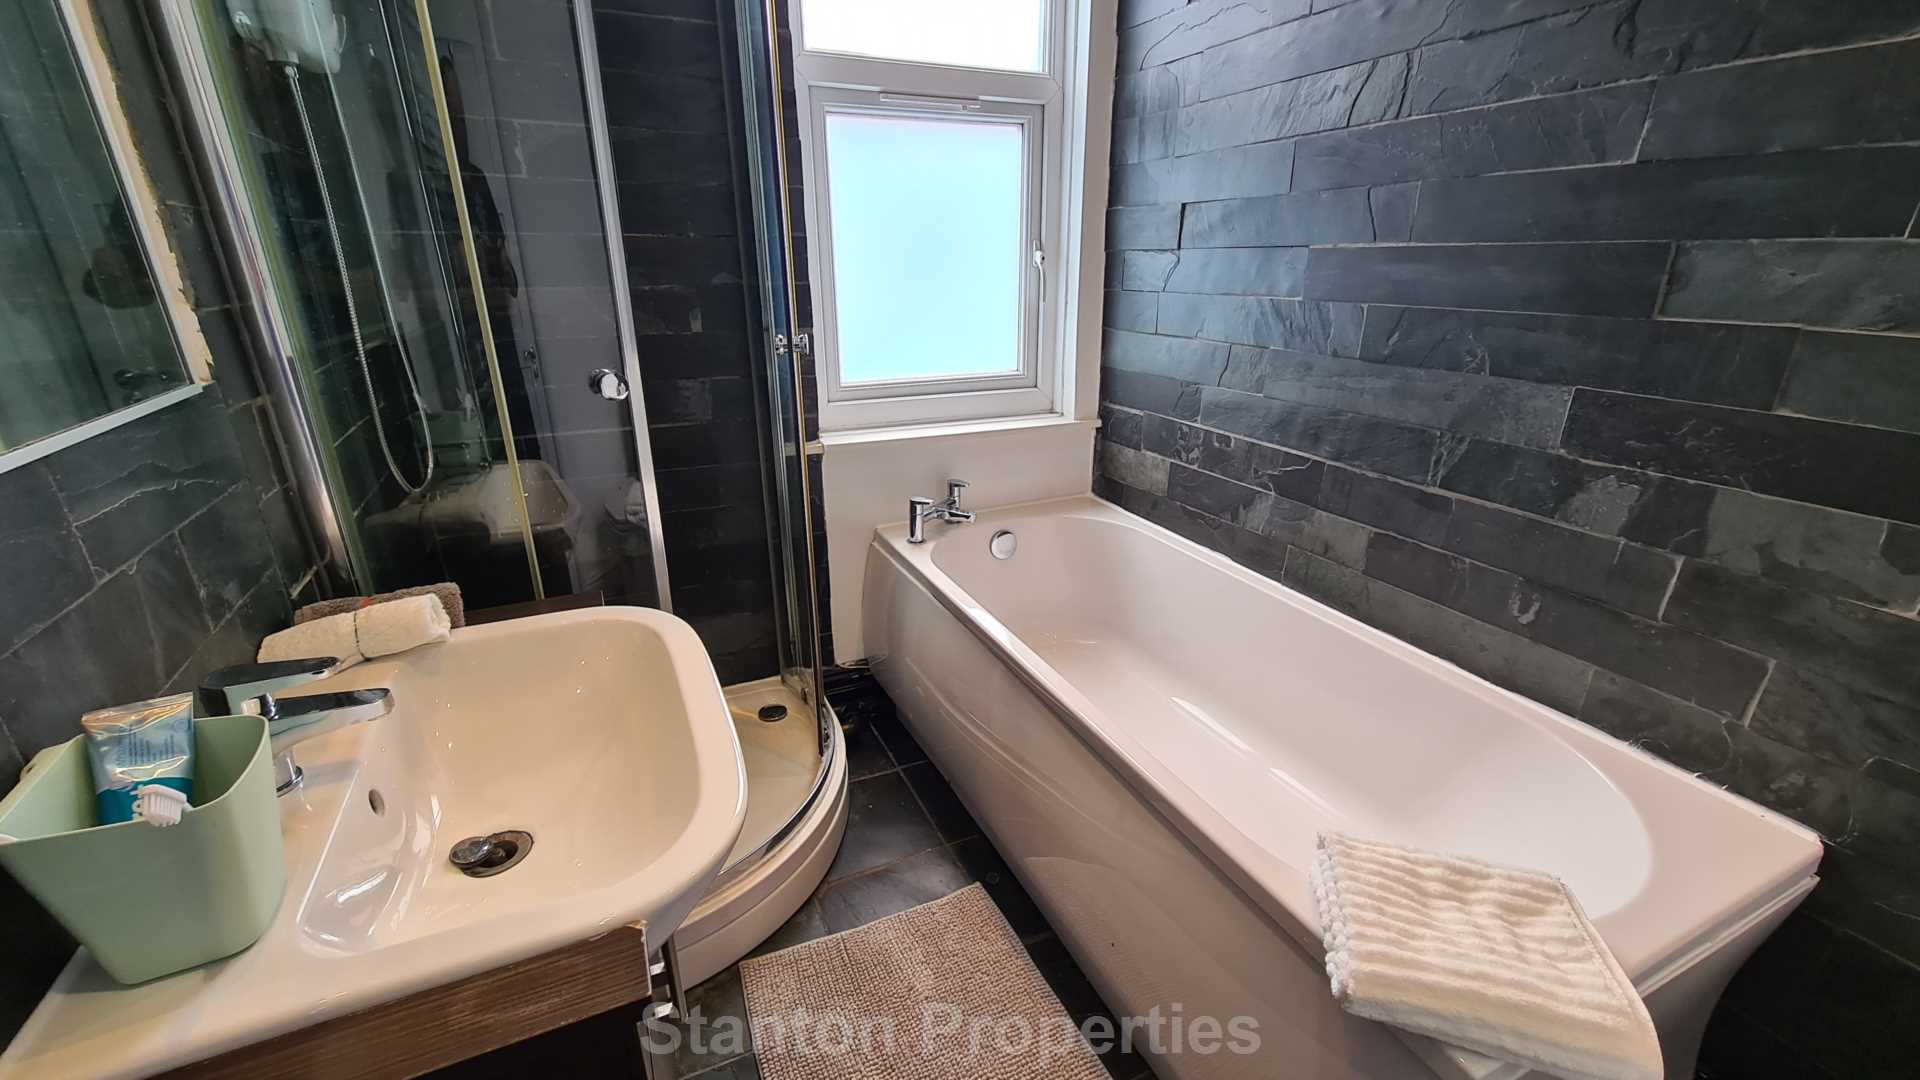 £136 pppw, See Video Tour, Furness Road, Fallowfield, Image 13